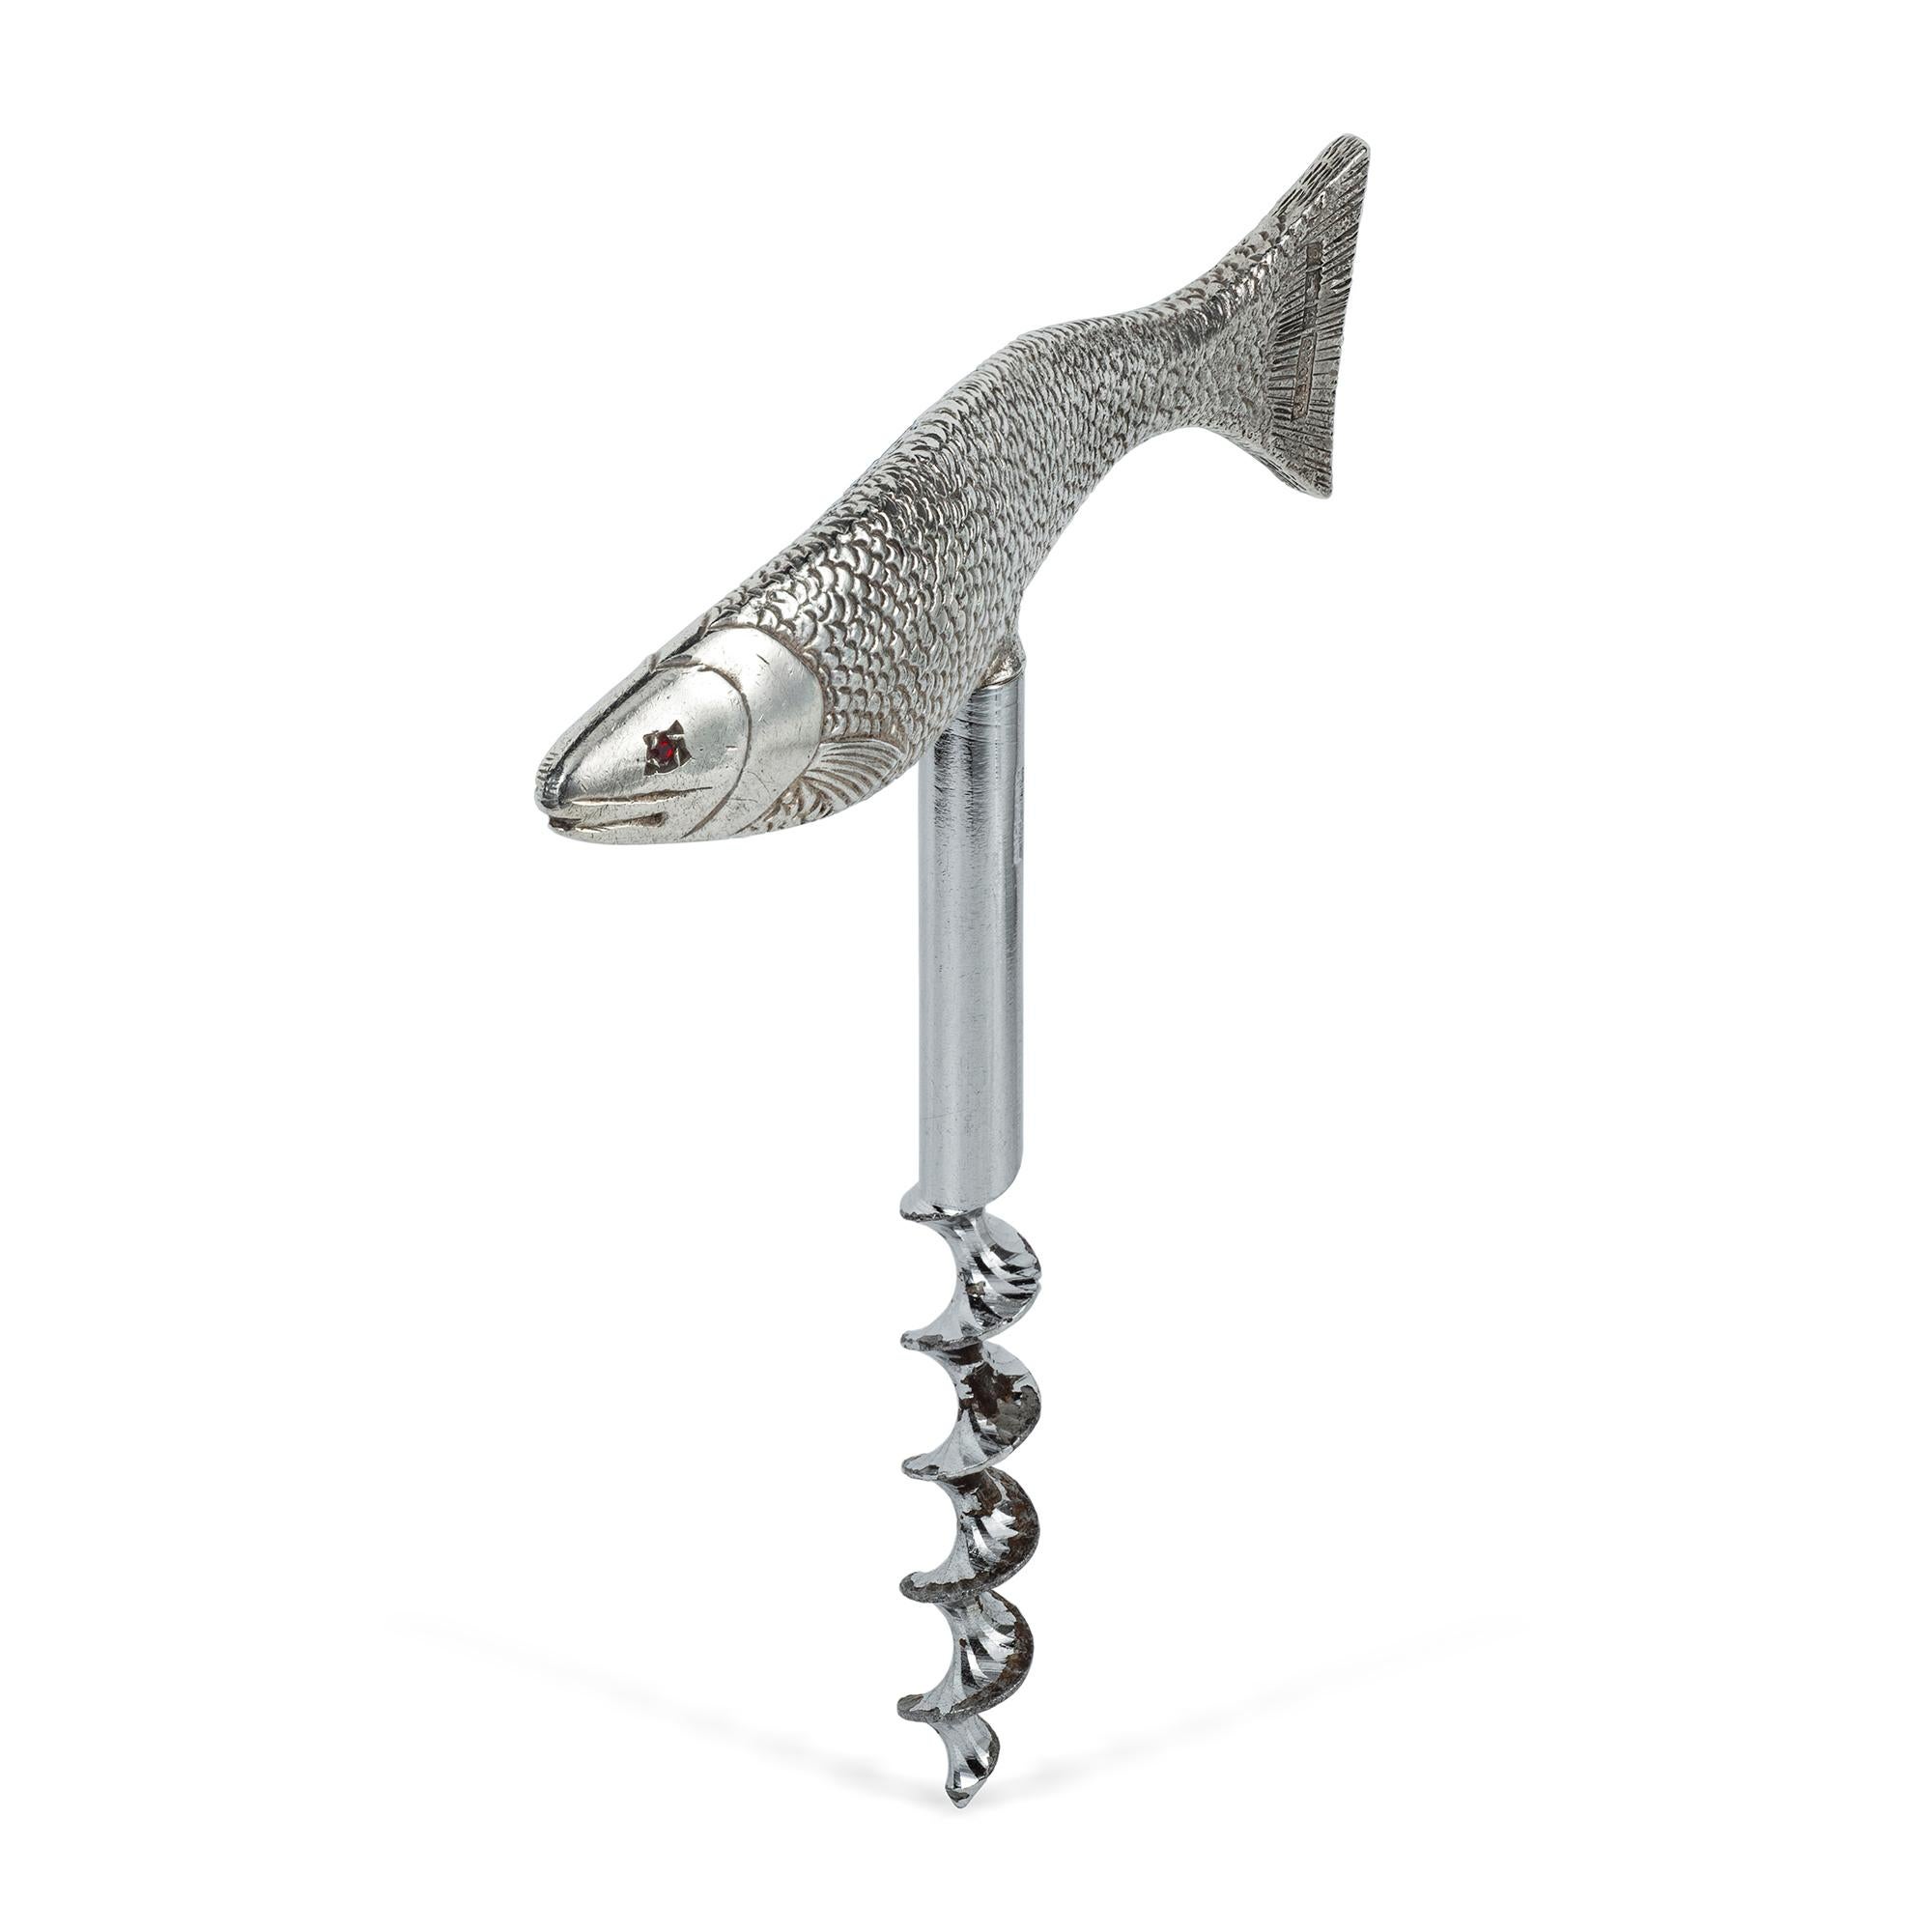 A sterling silver handled fish model  corkscrew, gross weight 1.6 ozs.  hallmarked Birmingham 1967, maker J.B Chatterley.

Should you choose to make this purchase we will delighted to send it to you in a Bentley & Skinner handmade leather case